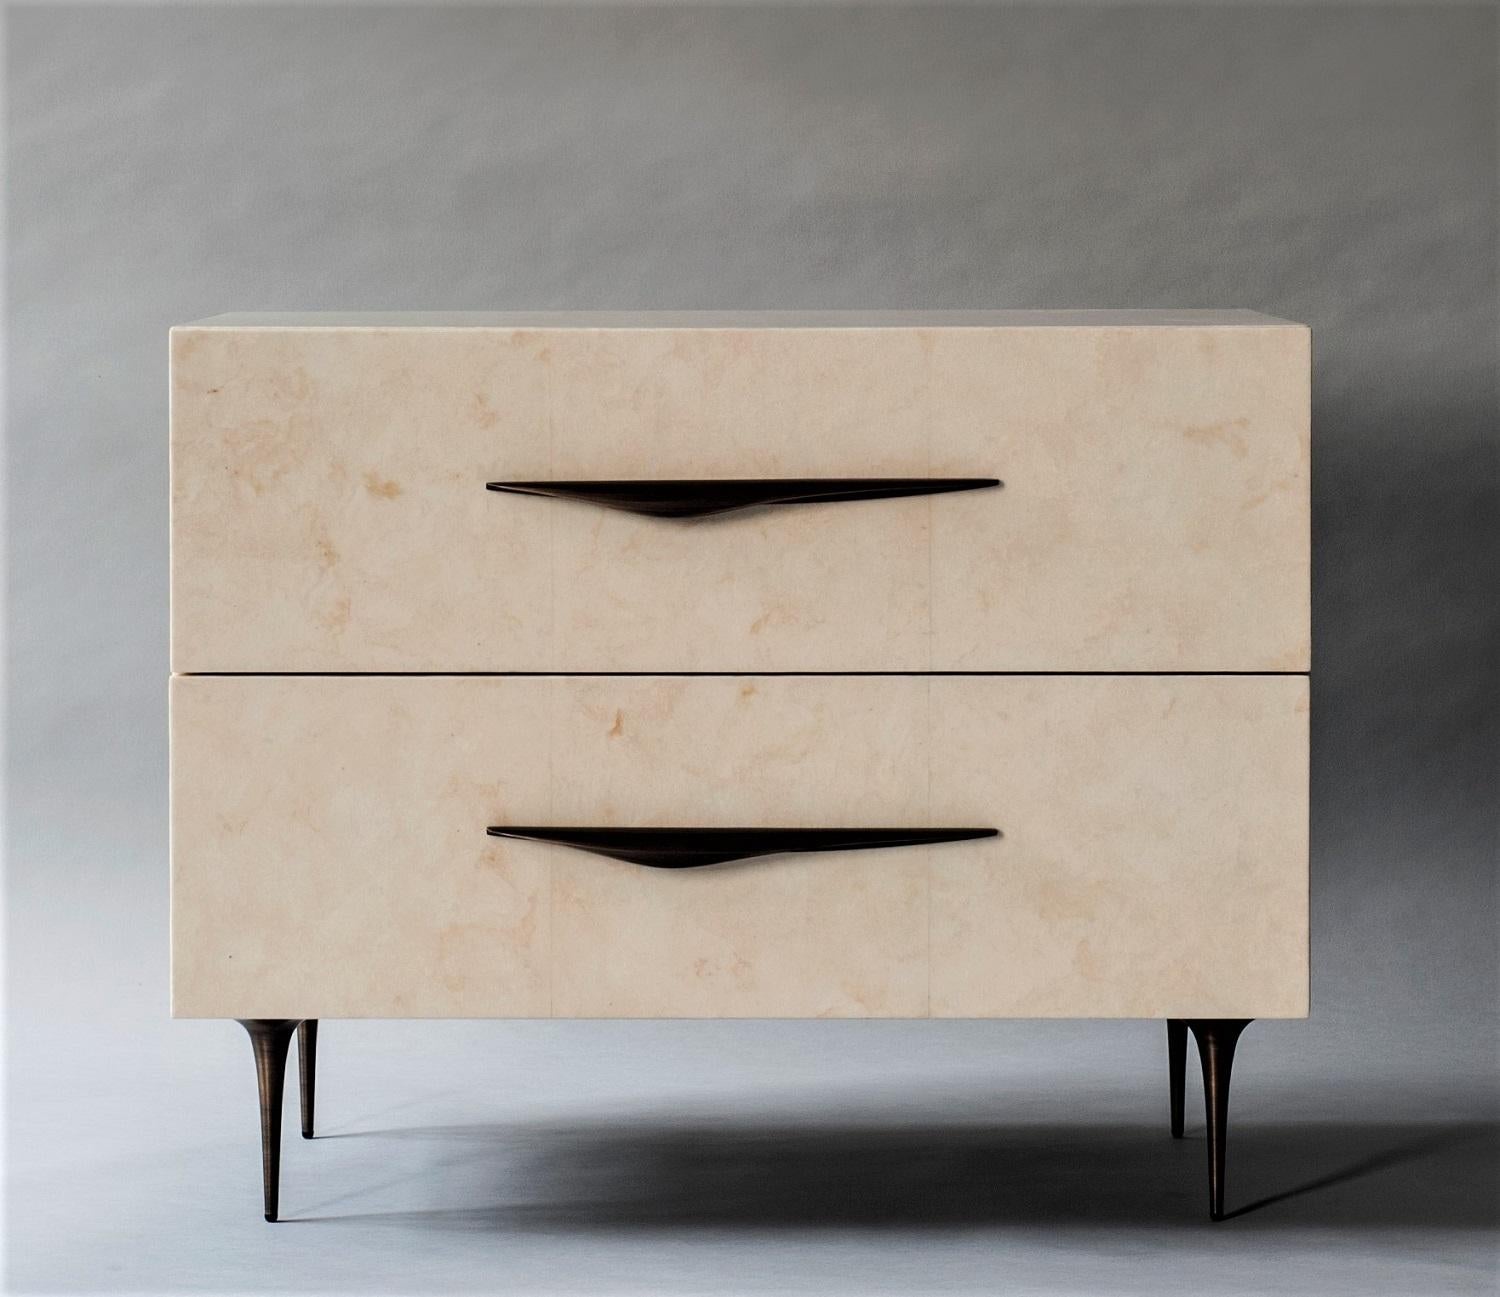 Antwerp bedside table by DeMuro Das 
Dimensions: W 76.2 x D 47.1 x H 61 cm
Materials: Carta (Ivory) - Matte 
 Solid bronze (Antique) handles and legs

Dimensions and finishes can be customized 

DeMuro Das is an international design firm and the